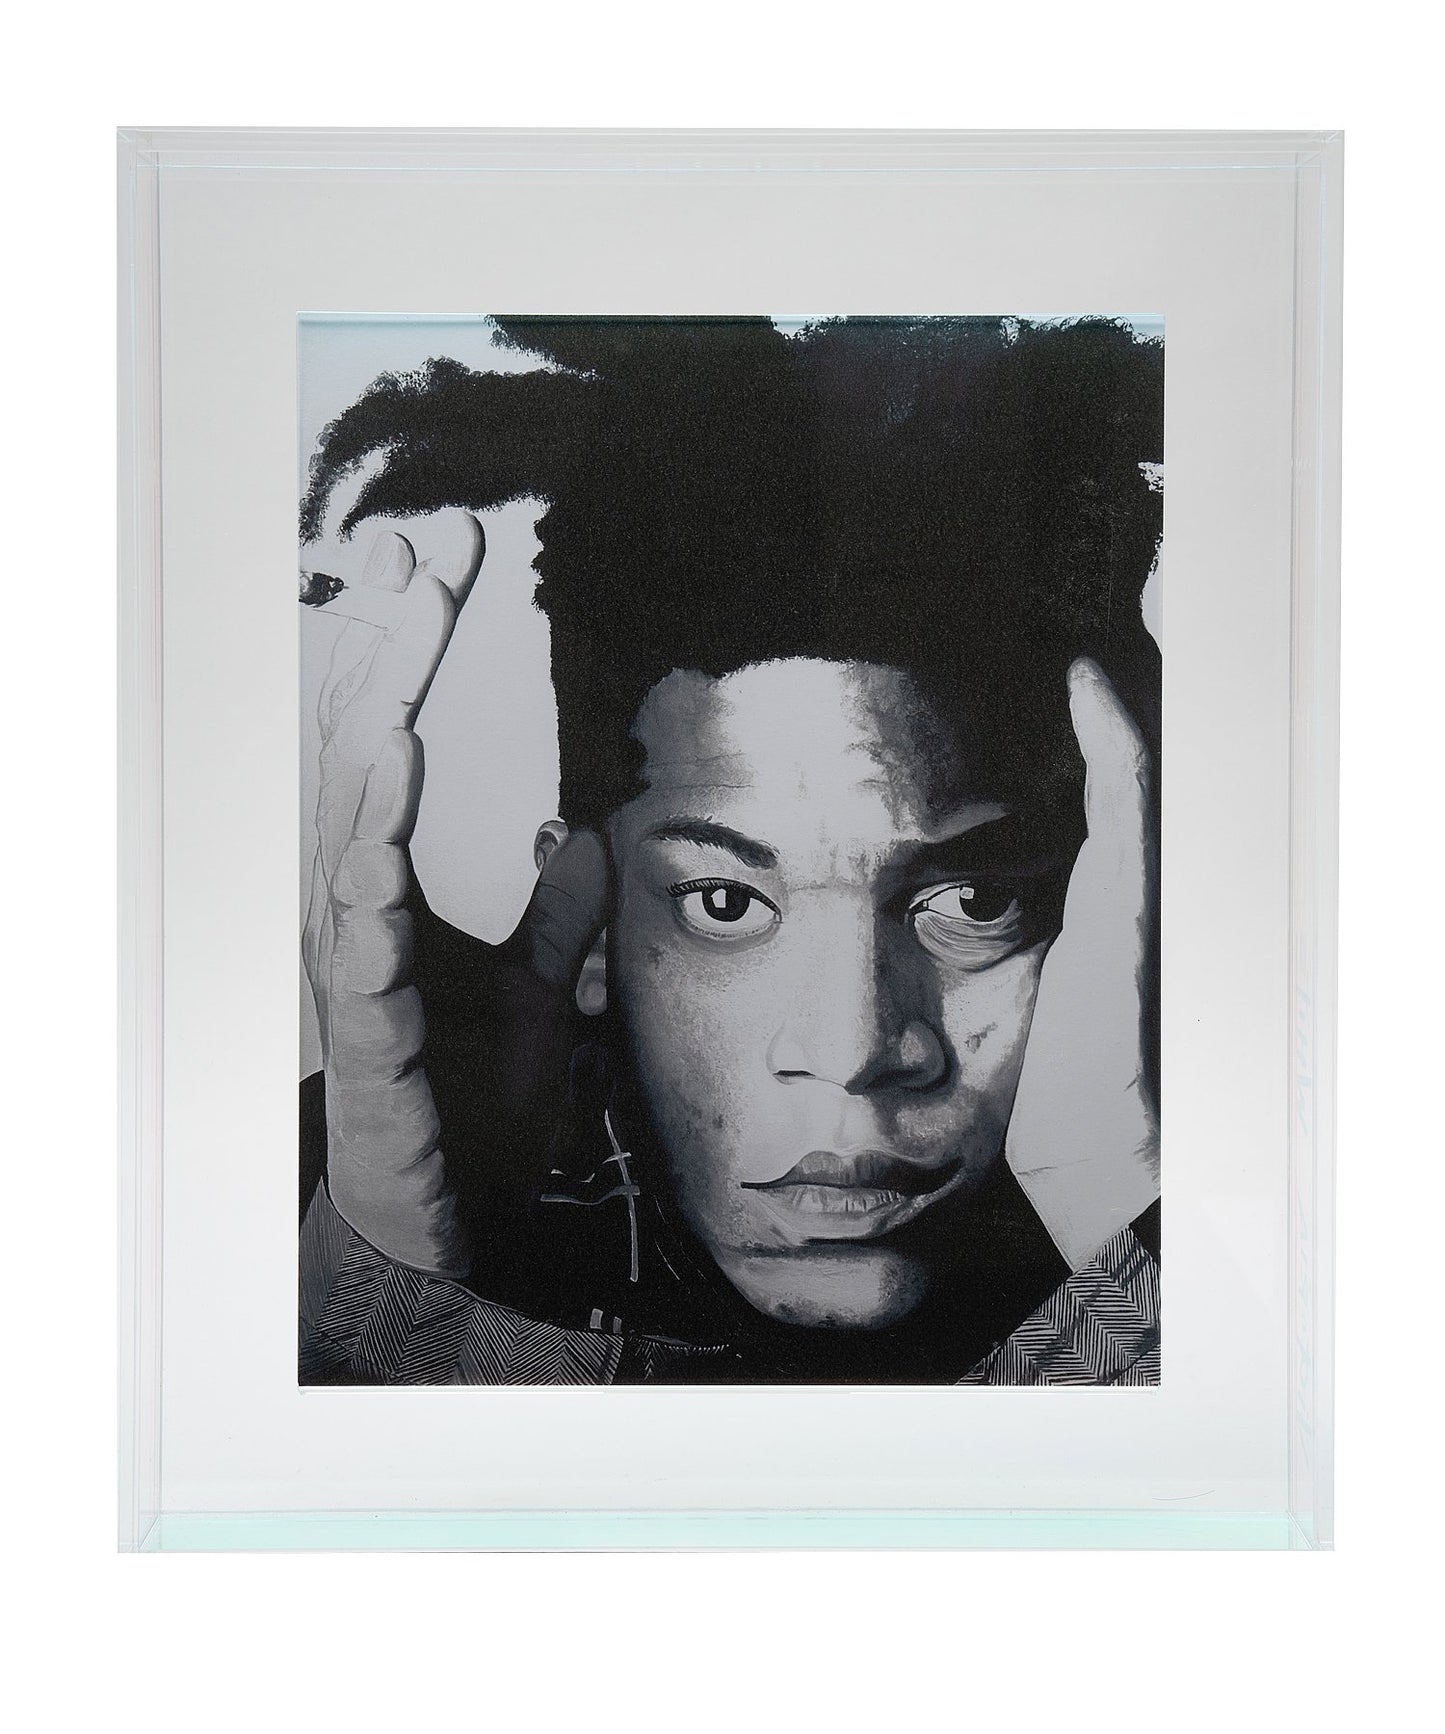 jean-michel basquiat print in iridescent floating acrylic frame